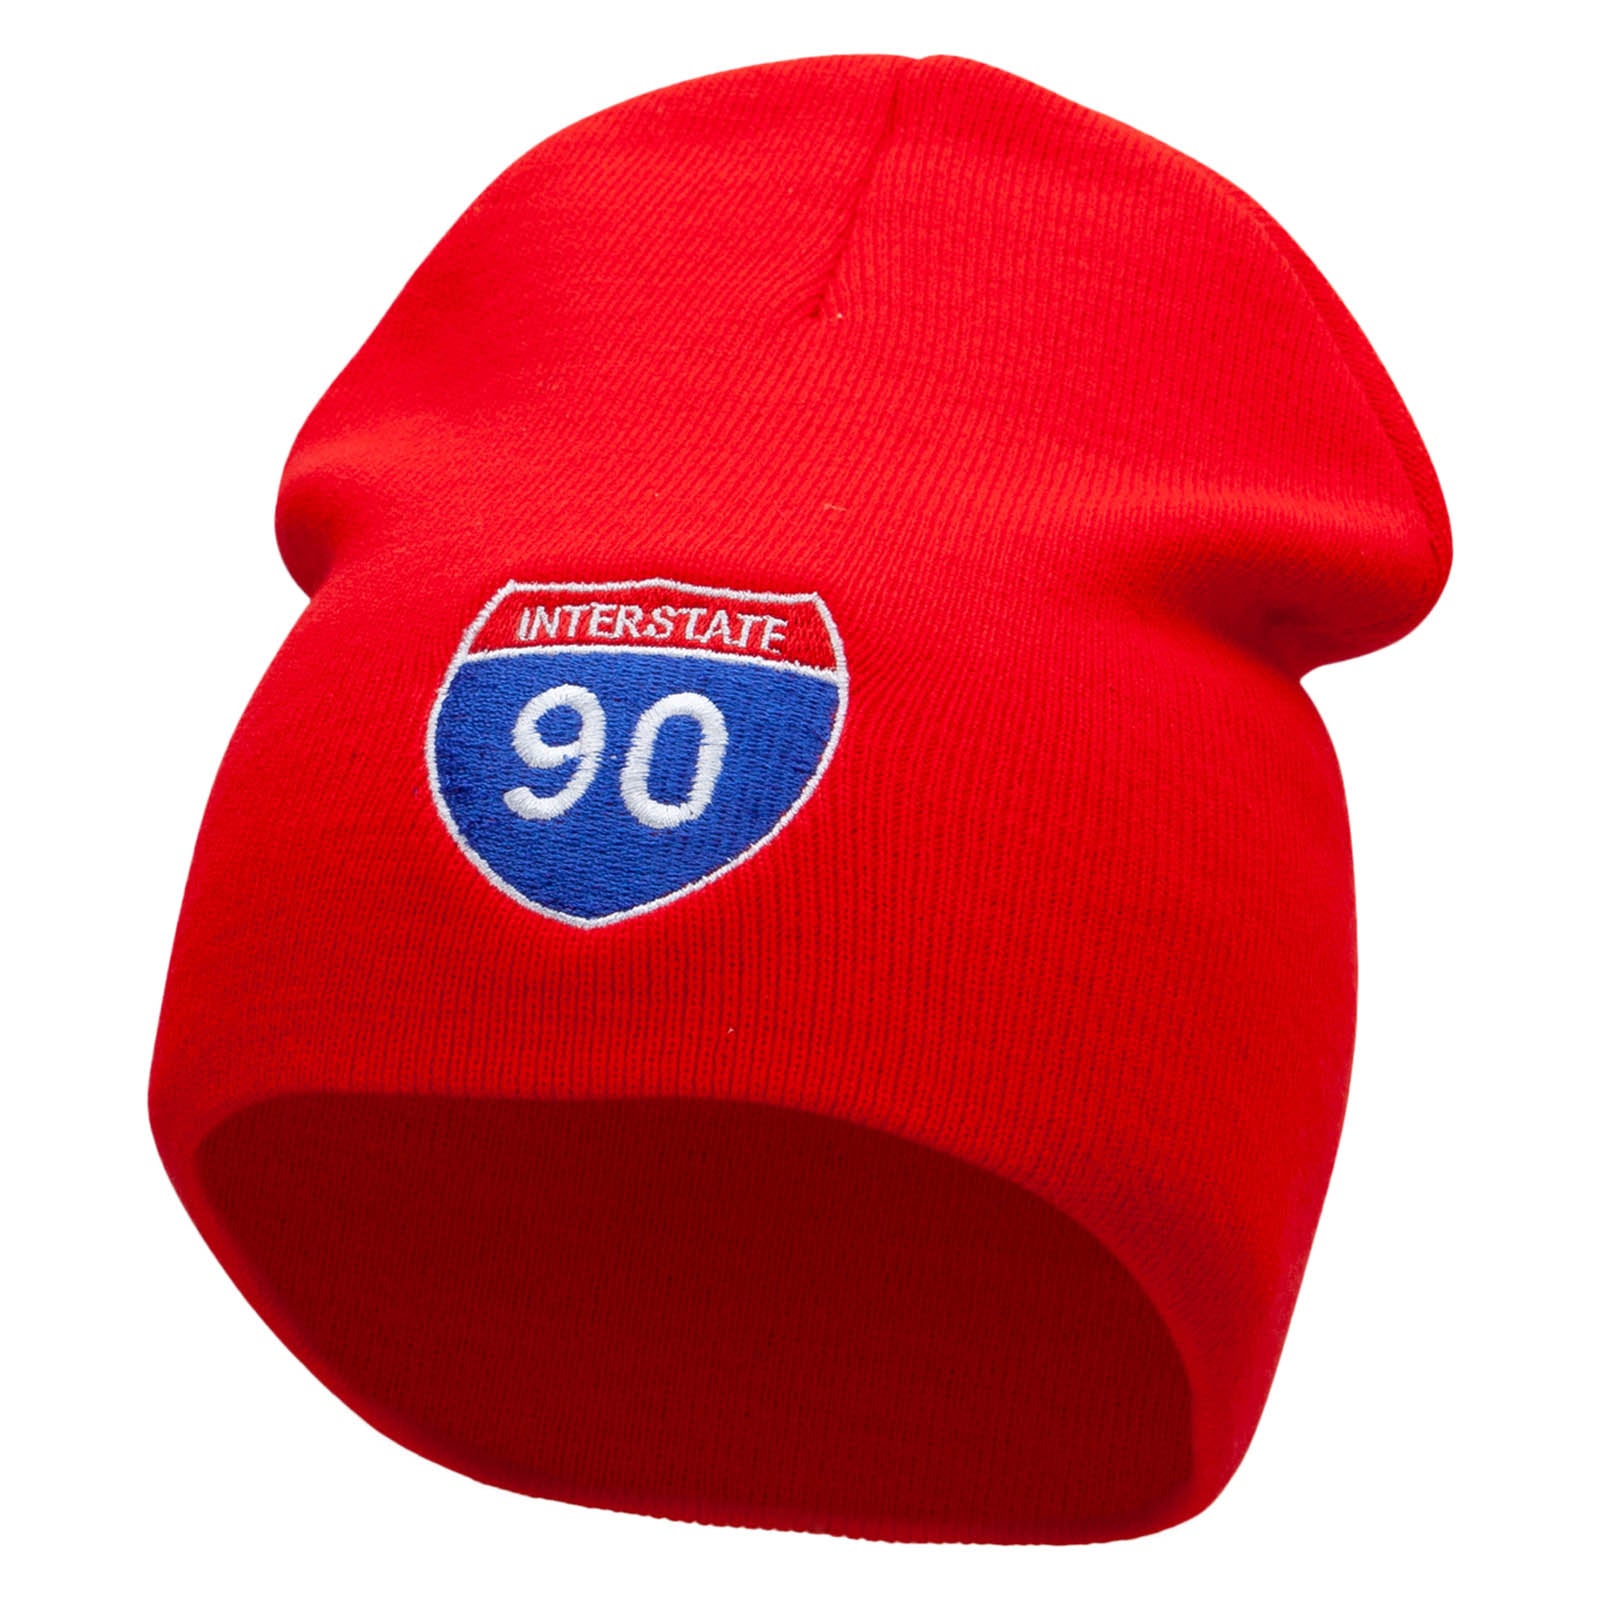 Interstate Freeway 90 Embroidered 8 Inch Short Beanie - Red OSFM